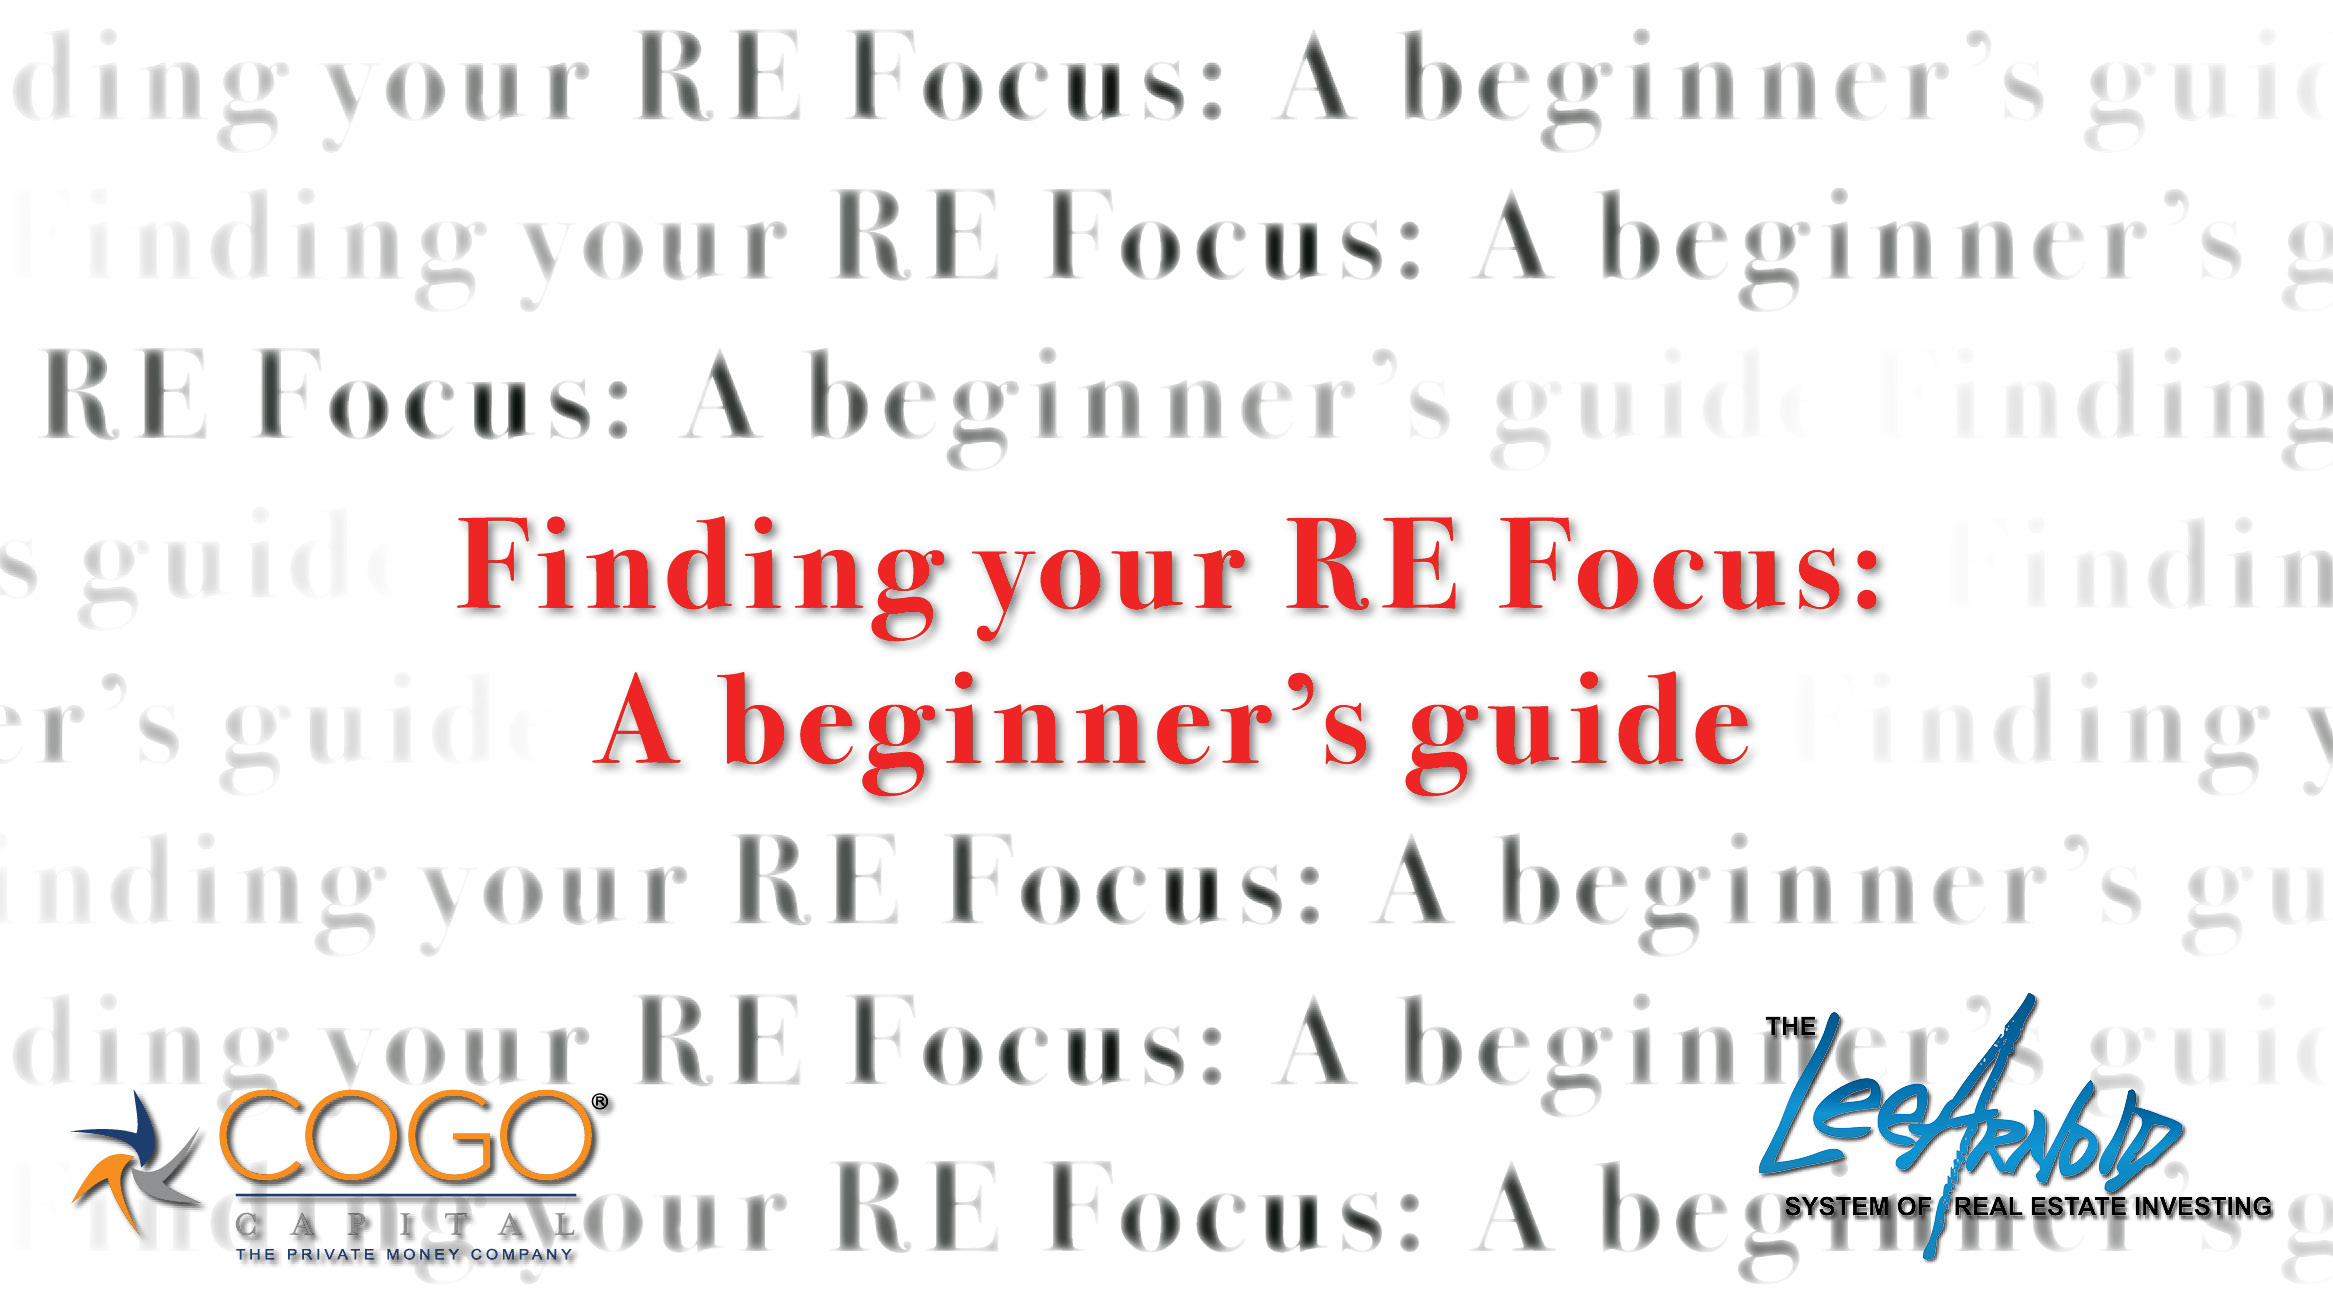 Finding your RE Focus: A beginner’s guide